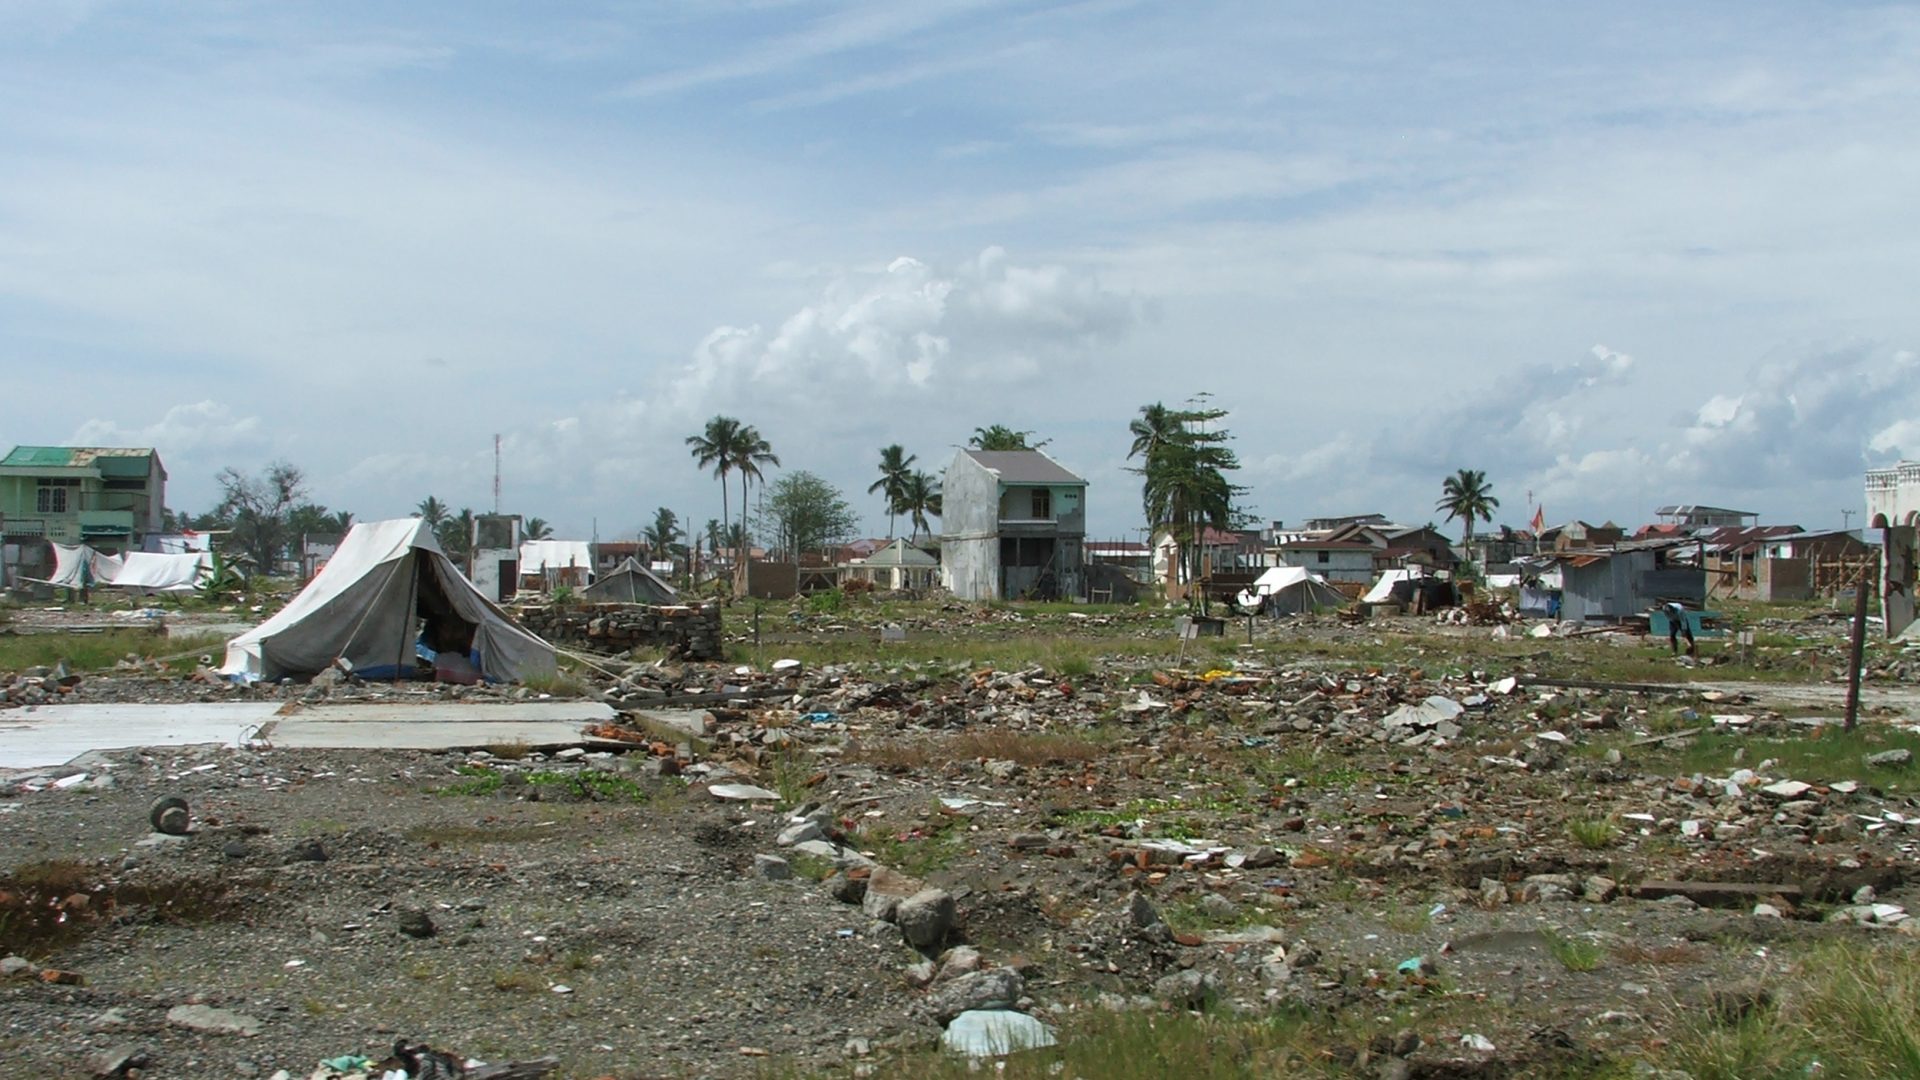 battered homes and debris fill the landscape after the 2004 Indian Ocean tsunami.